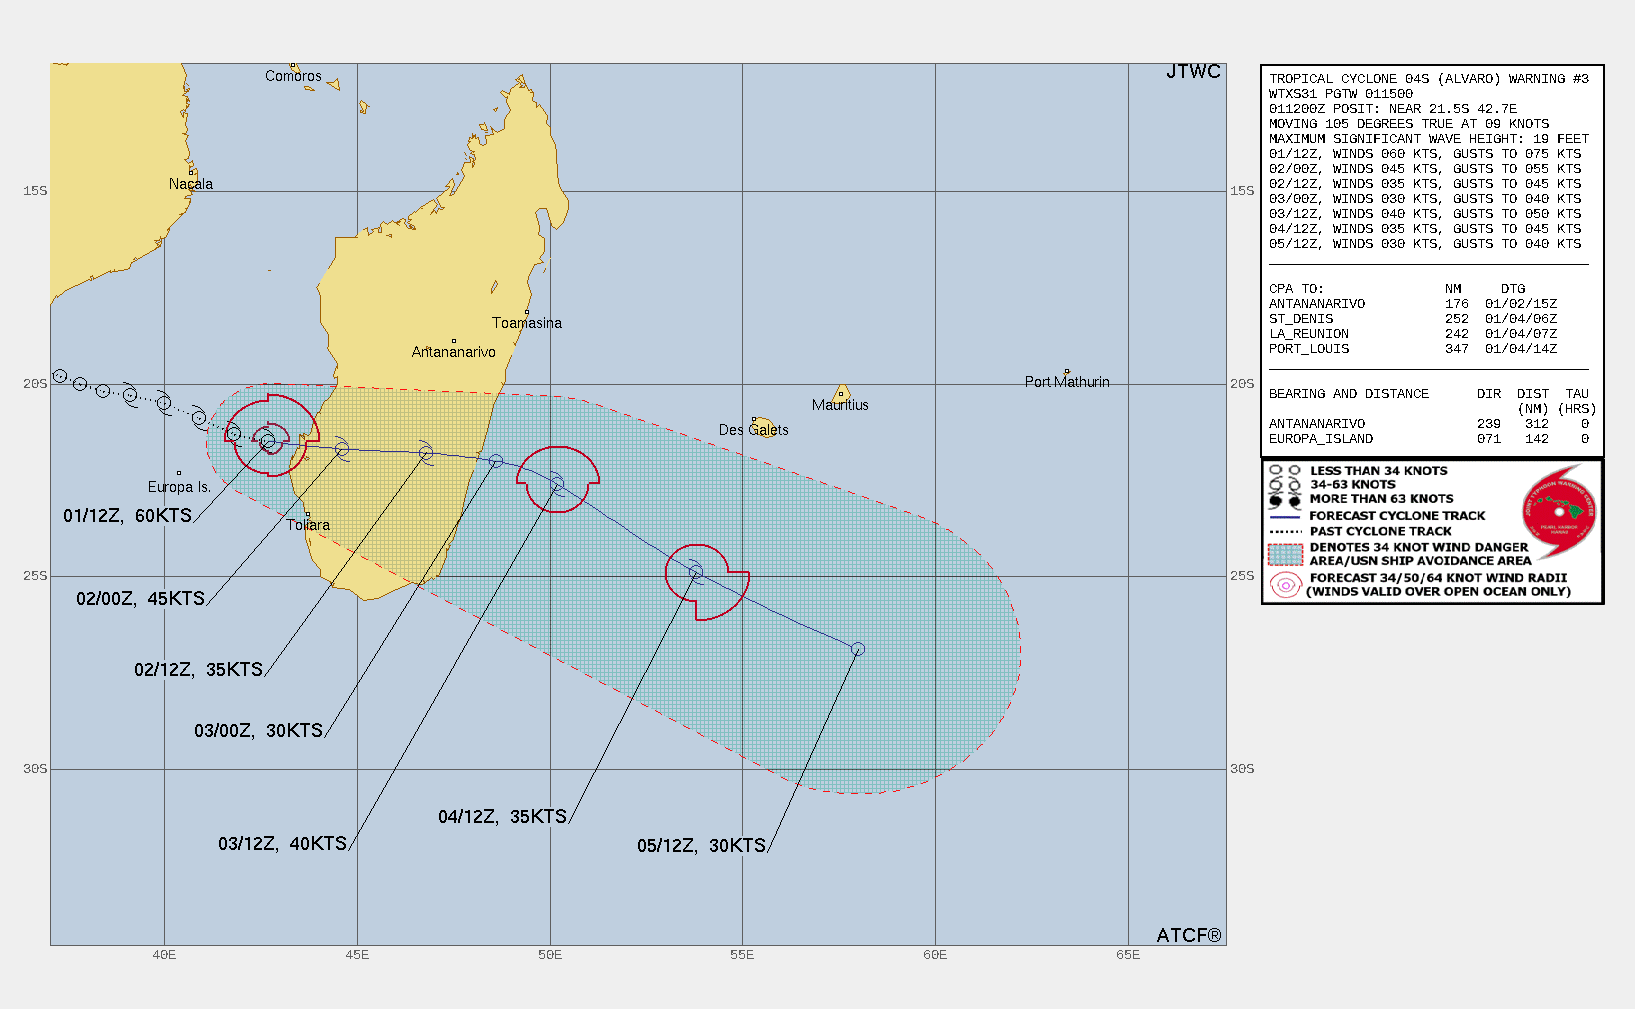 FORECAST REASONING.  SIGNIFICANT FORECAST CHANGES: DUE TO RAPID CONSOLIDATION OF THE SYSTEM'S CORE, THE INITIAL INTENSITY IS SIGNIFICANTLY HIGHER THAN THE PREVIOUS JTWC WARNING. ADDITIONALLY, INITIAL INTENSITIES FROM 311800Z TO 010600Z HAVE BEEN RE-EVALUATED AND REVISED HIGHER.   FORECAST DISCUSSION: TC 04S IS FORECAST TO WEAKEN AS IT TRACKS EASTWARD AND APPROACHES THE COAST OF MADAGASCAR, WITH LANDFALL ANTICIPATED NEAR TAU 06. AFTER TAU 06, THE SYSTEM WILL WEAKEN RAPIDLY AND DISSIPATE AS IT TRACKS EASTWARD ACROSS THE MOUNTAINOUS TERRAIN OF SOUTHERN MADAGASCAR. TC 04S WILL RE-EMERGE OVER THE INDIAN OCEAN NEAR TAU 36 WITH A BRIEF PERIOD OF REINTENSIFICATION TO ABOUT 40 KNOTS BY TAU 48. AFTER TAU 48, TC 04S WILL TURN EAST-SOUTHEASTWARD AS IT TRANSITIONS TO THE STEERING INFLUENCE OF A SUBTROPICAL RIDGE POSITIONED TO THE NORTHEAST. THE SYSTEM IS EXPECTED TO WEAKEN STEADILY AS IT INTERACTS WITH STRENGTHENING SUBTROPICAL WESTERLIES AND ENCOUNTERS STRONG VERTICAL WIND SHEAR (40 TO 55 KNOTS) AND COOLING SEA SURFACE TEMPERATURES (26 TO 25 C). TC 04S WILL DISSIPATE NO LATER THAN TAU 96.